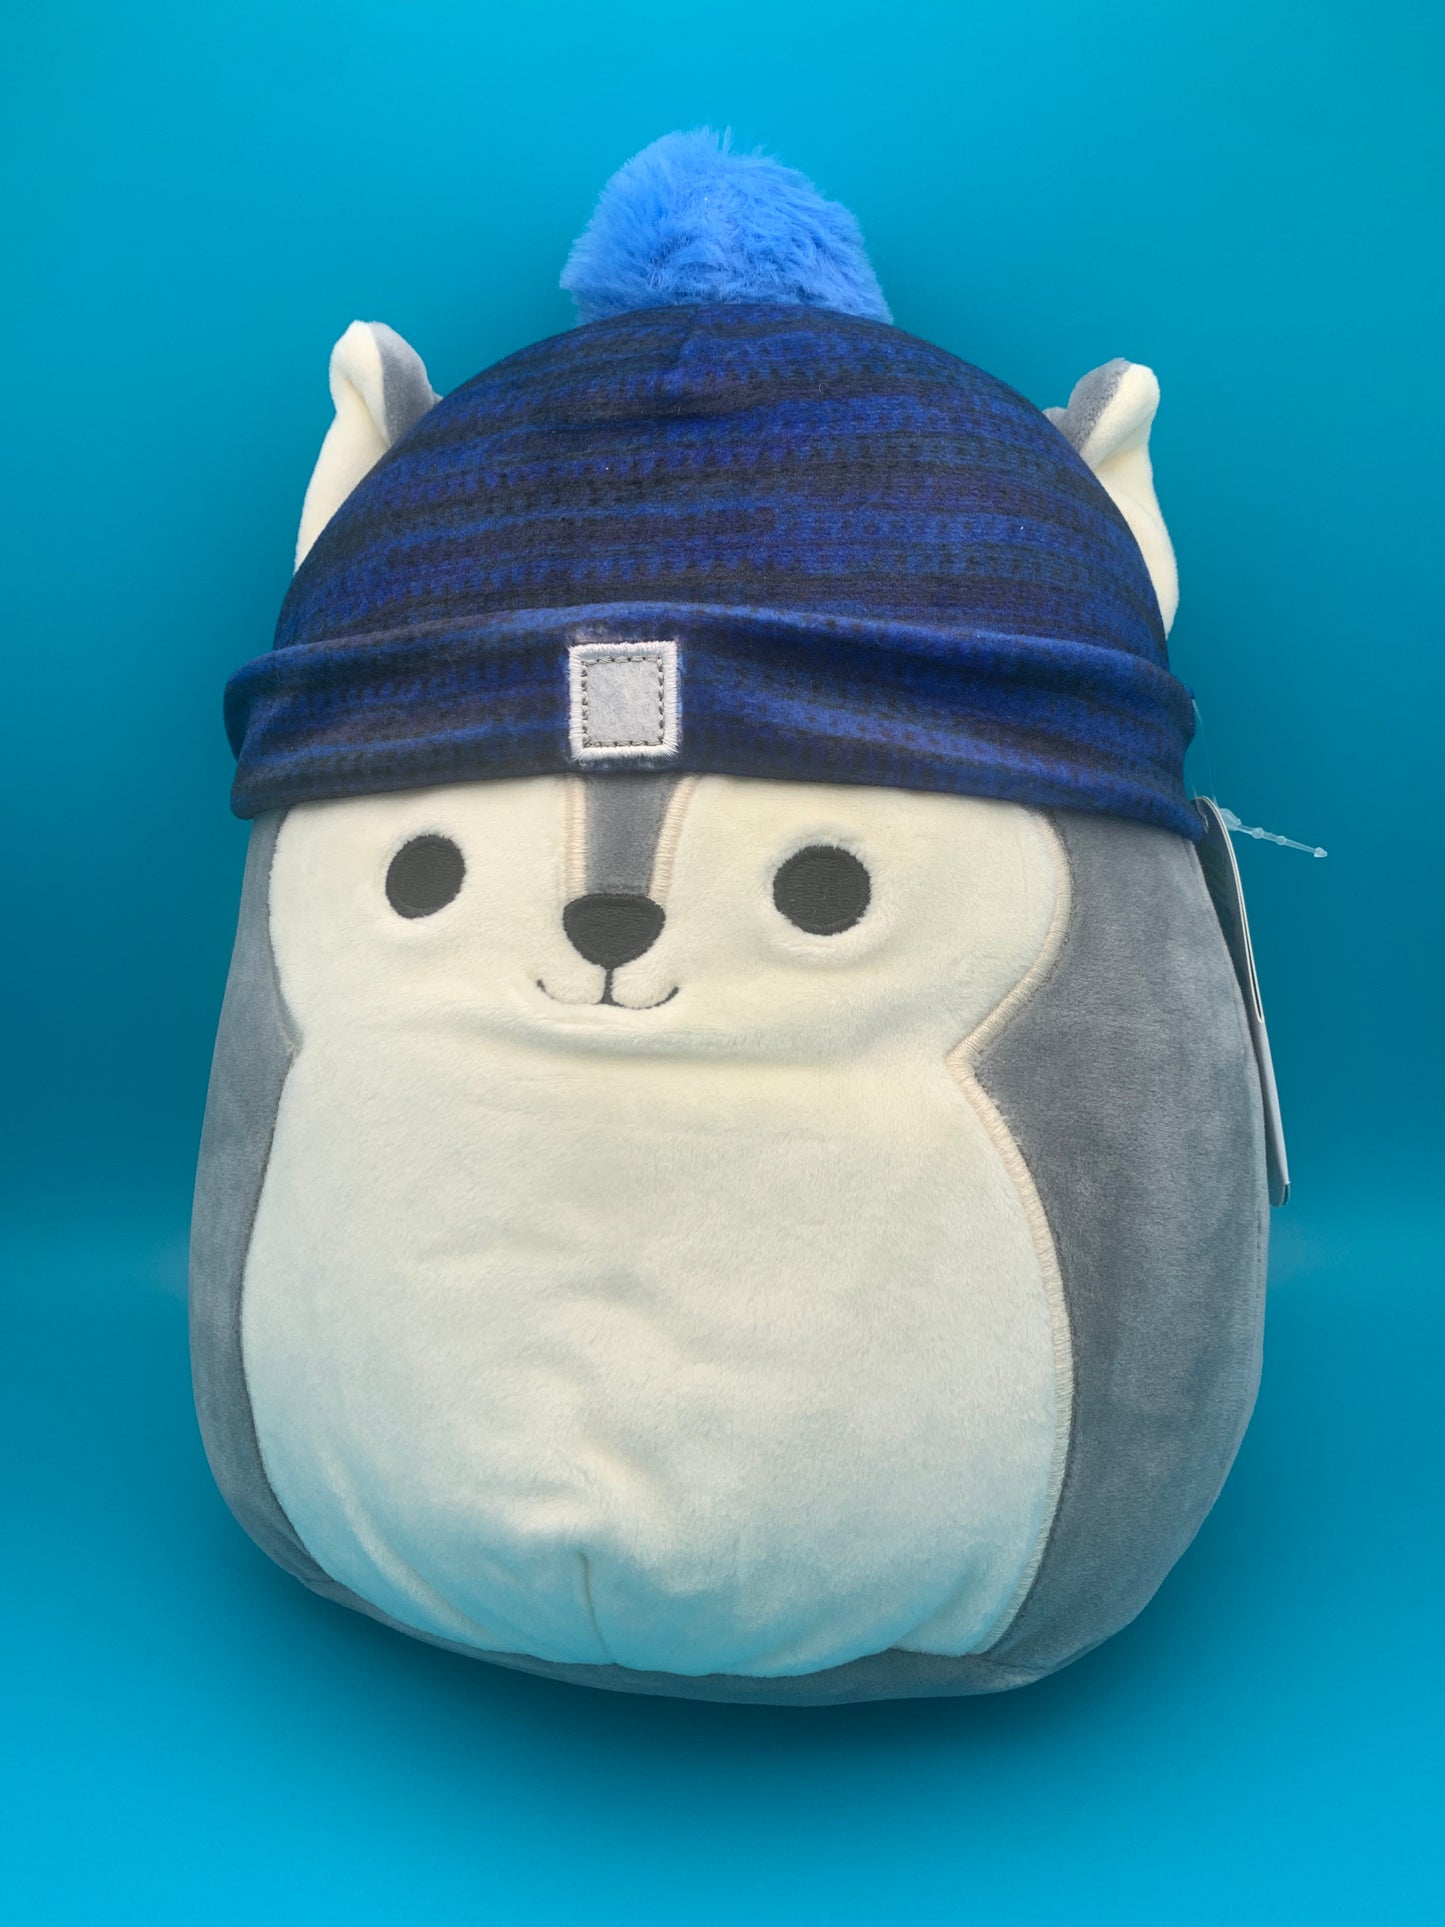 Squishmallow Tilman the Husky with Beanie 8" inch - Scratch on Hanger Tag